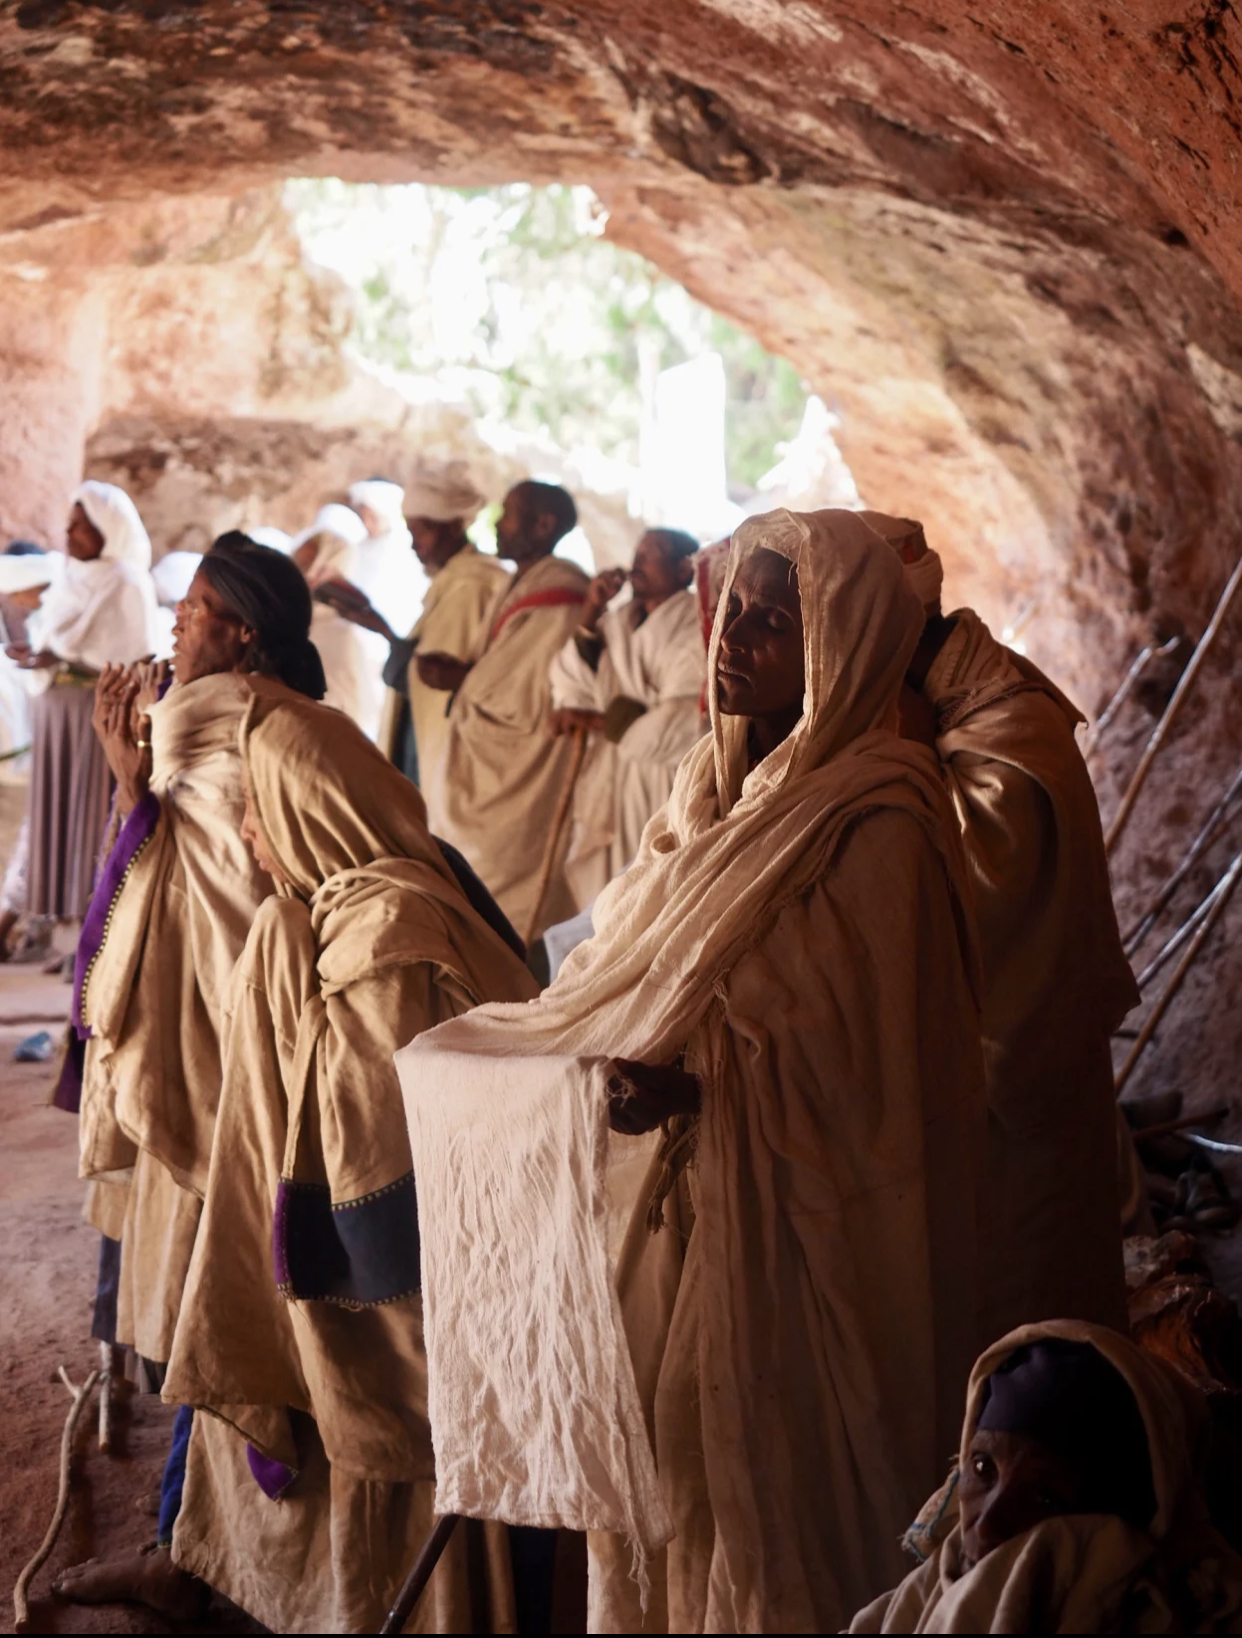 Ethiopia's Lalibela historical site known as the "Second Jerusalem" reportedly endangered